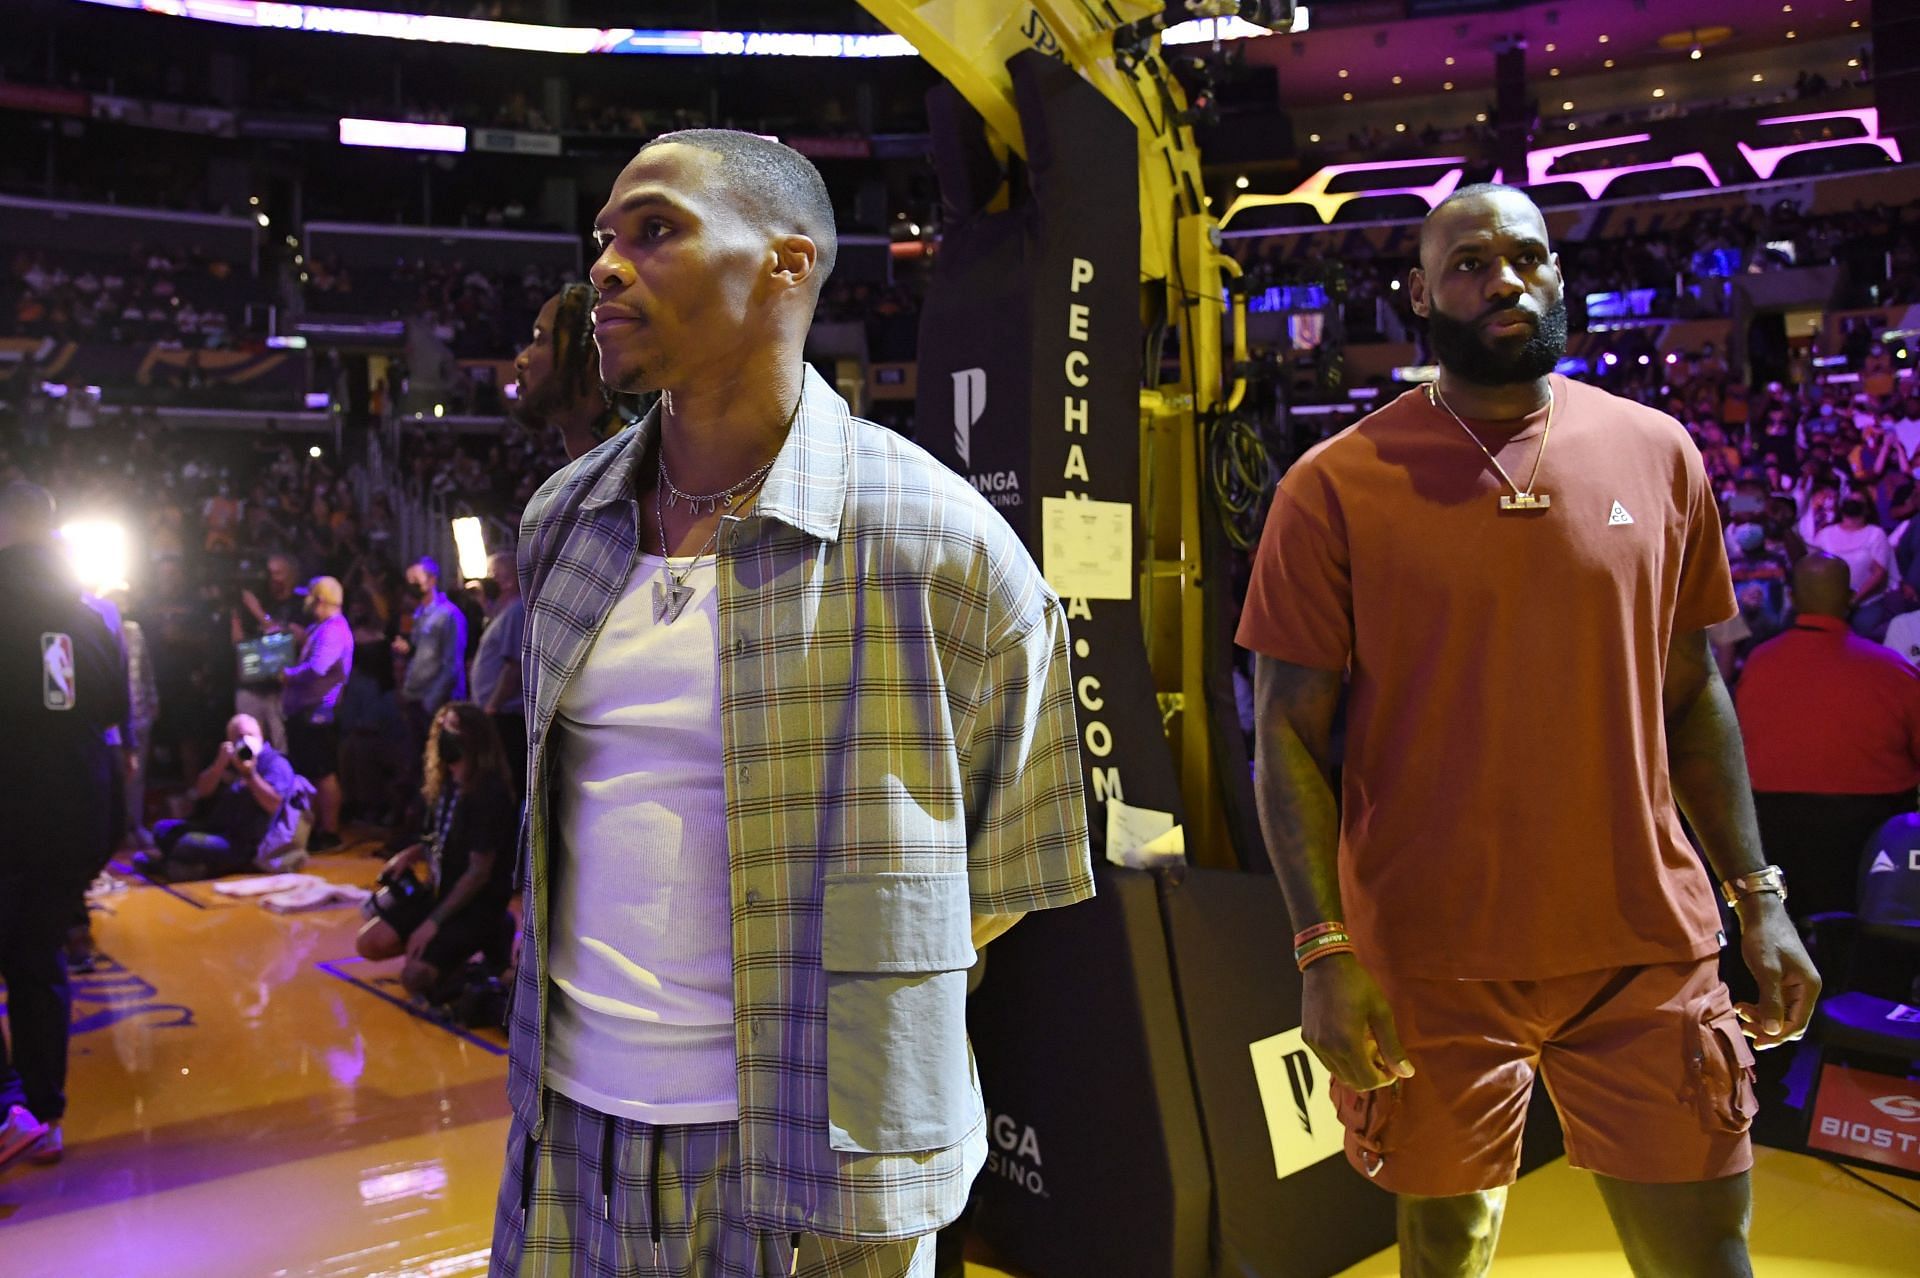 Los Angeles Lakers superstars Russell Westbrook and LeBron James